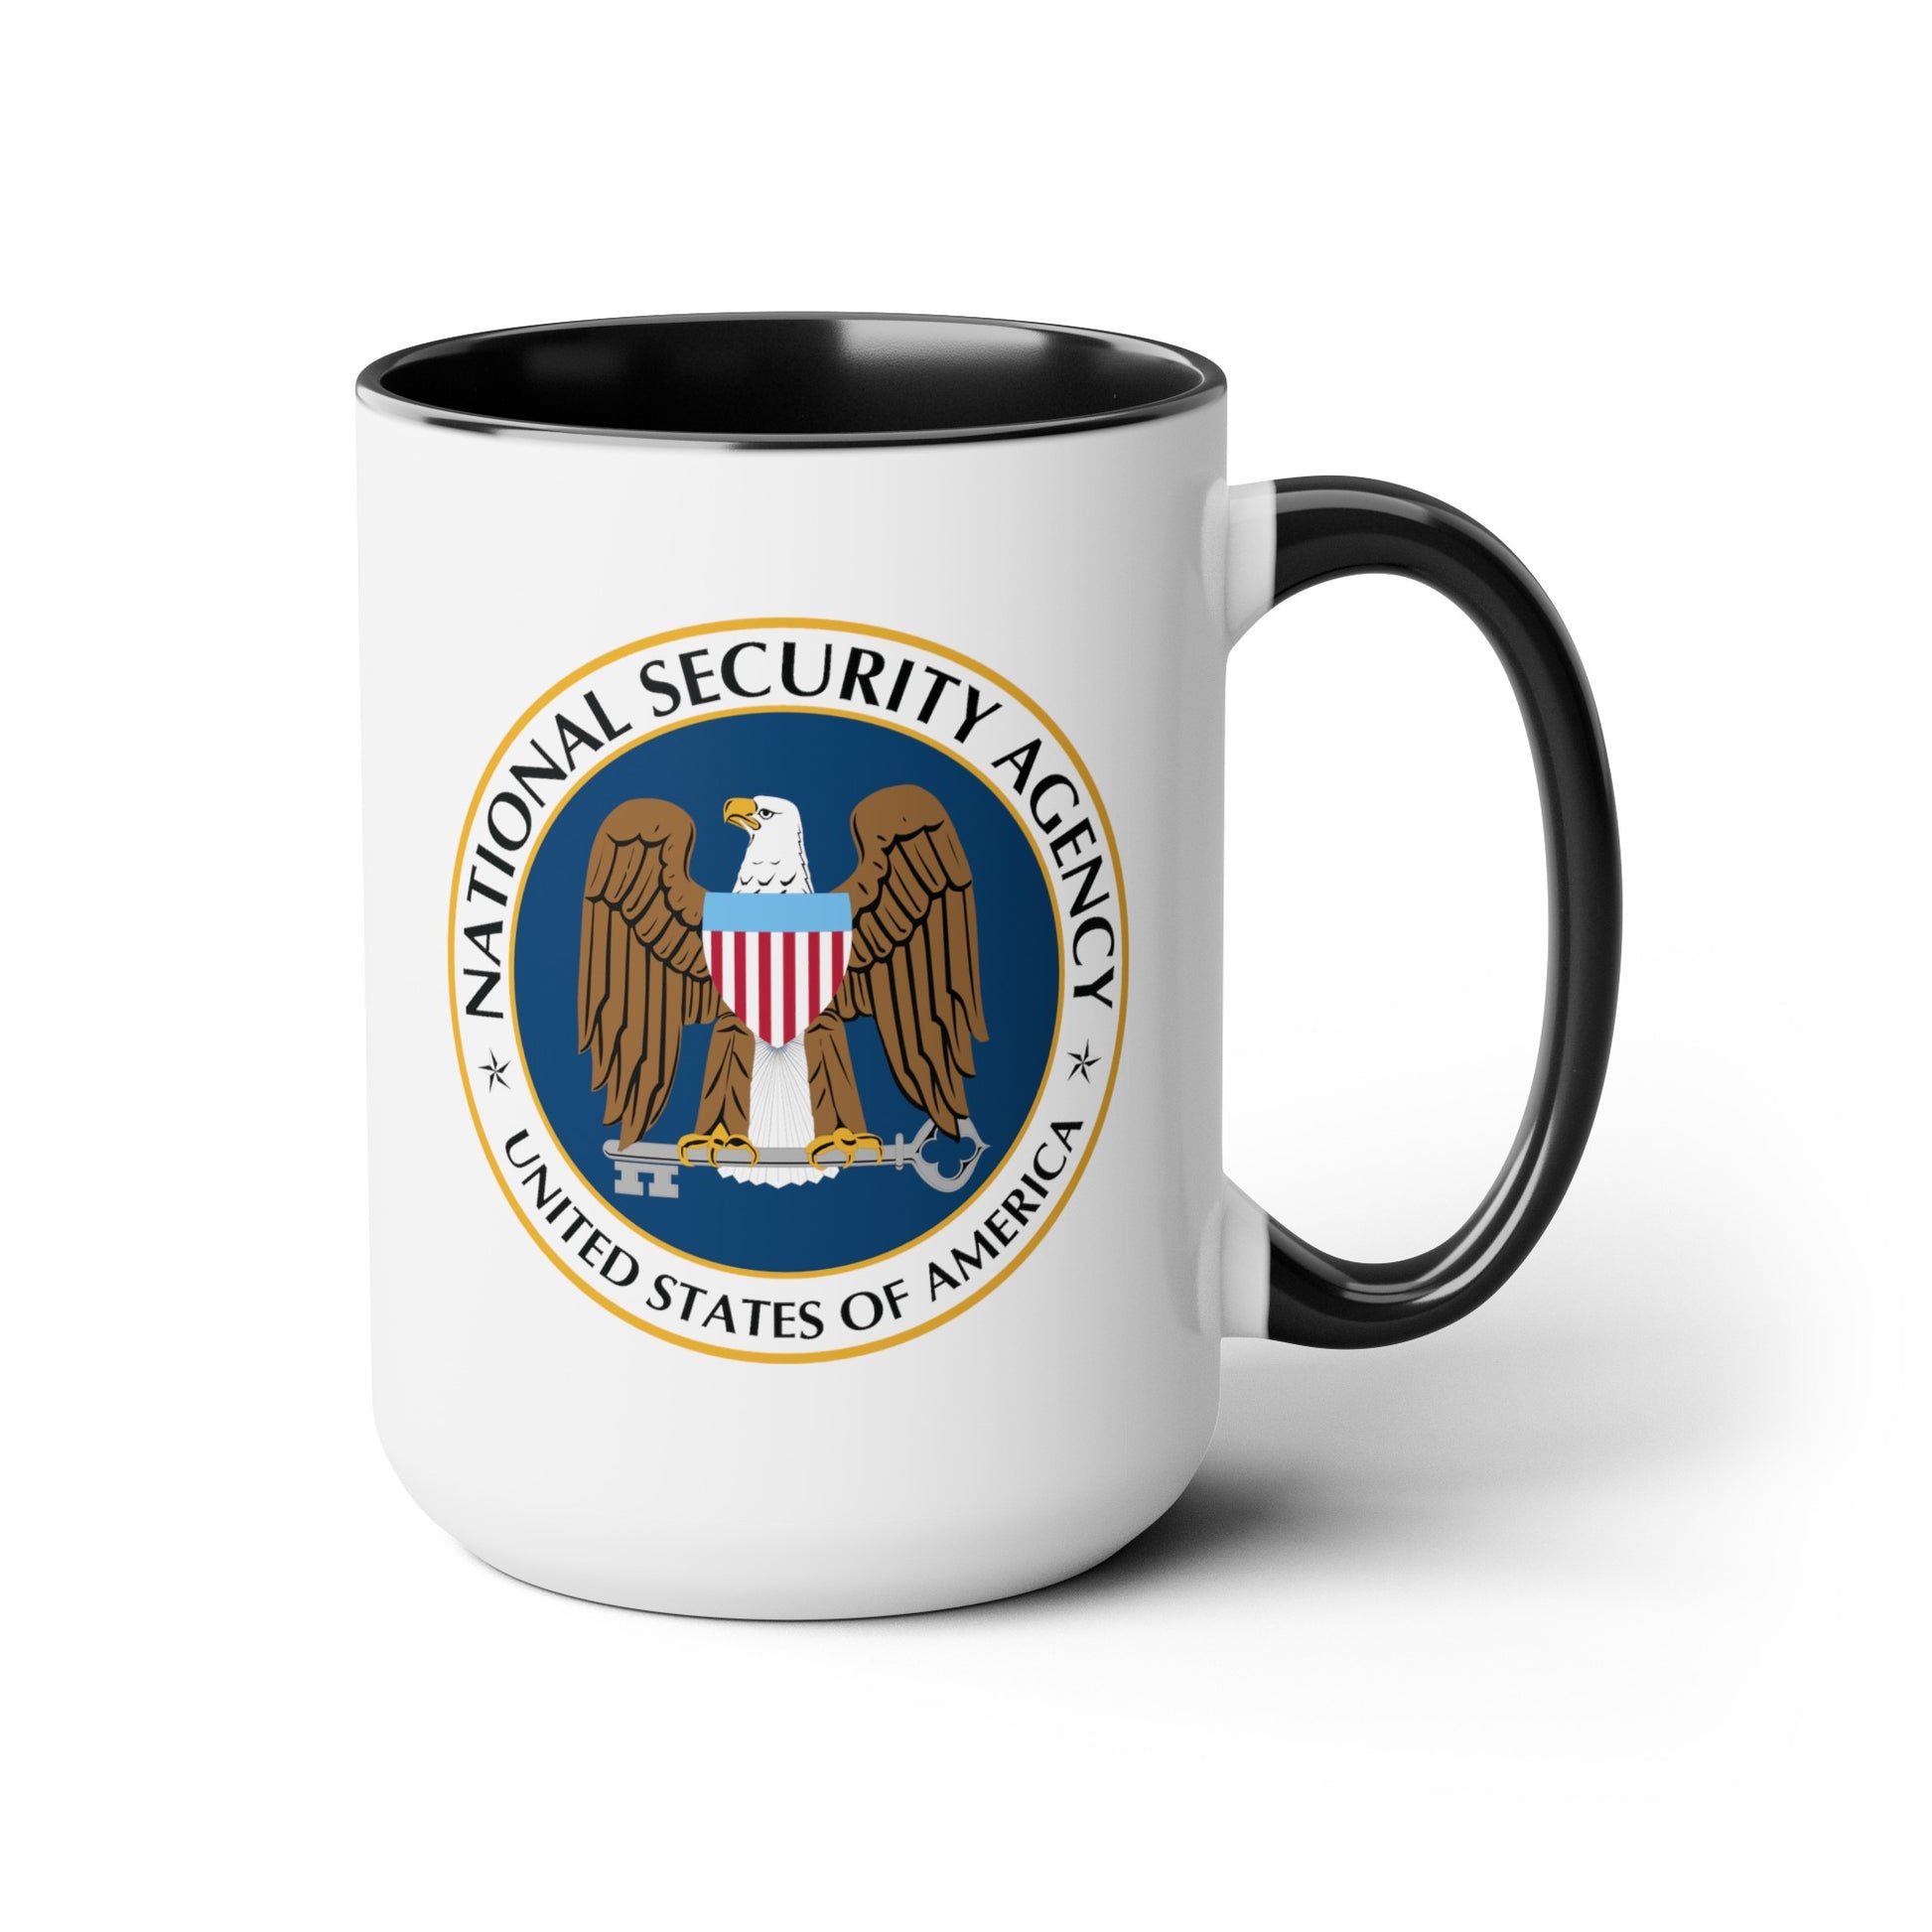 National Security Agency Coffee Mug - Double Sided Black Accent White Ceramic 15oz by TheGlassyLass.com